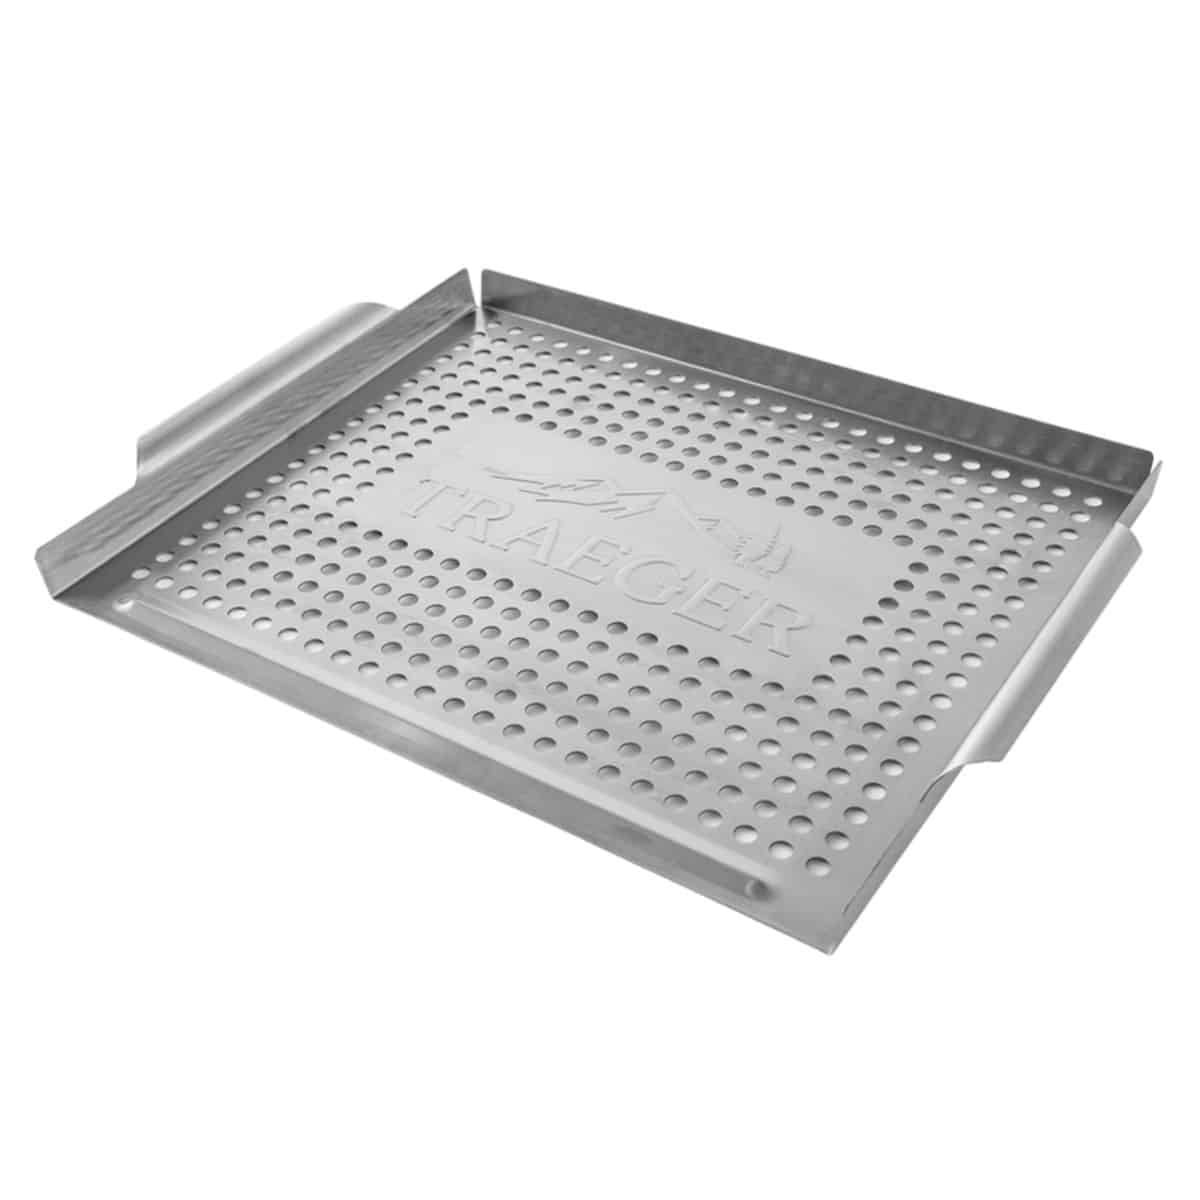 A stainless steel grill basket on a white background.